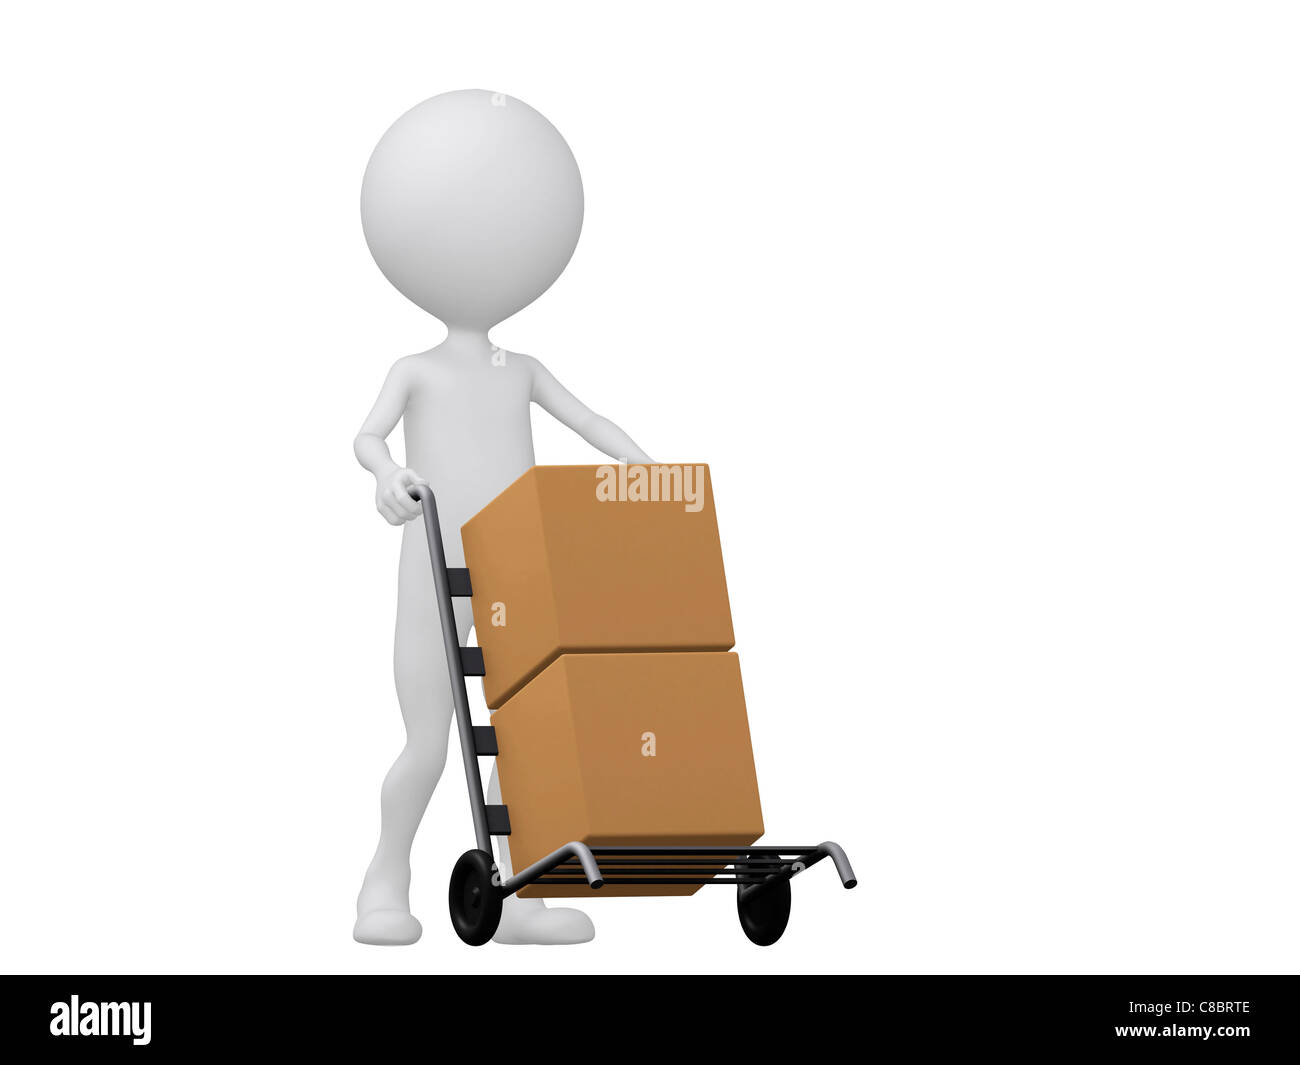 3d people icon with hand trucks and cargo boxes- This is a 3d render illustration Stock Photo